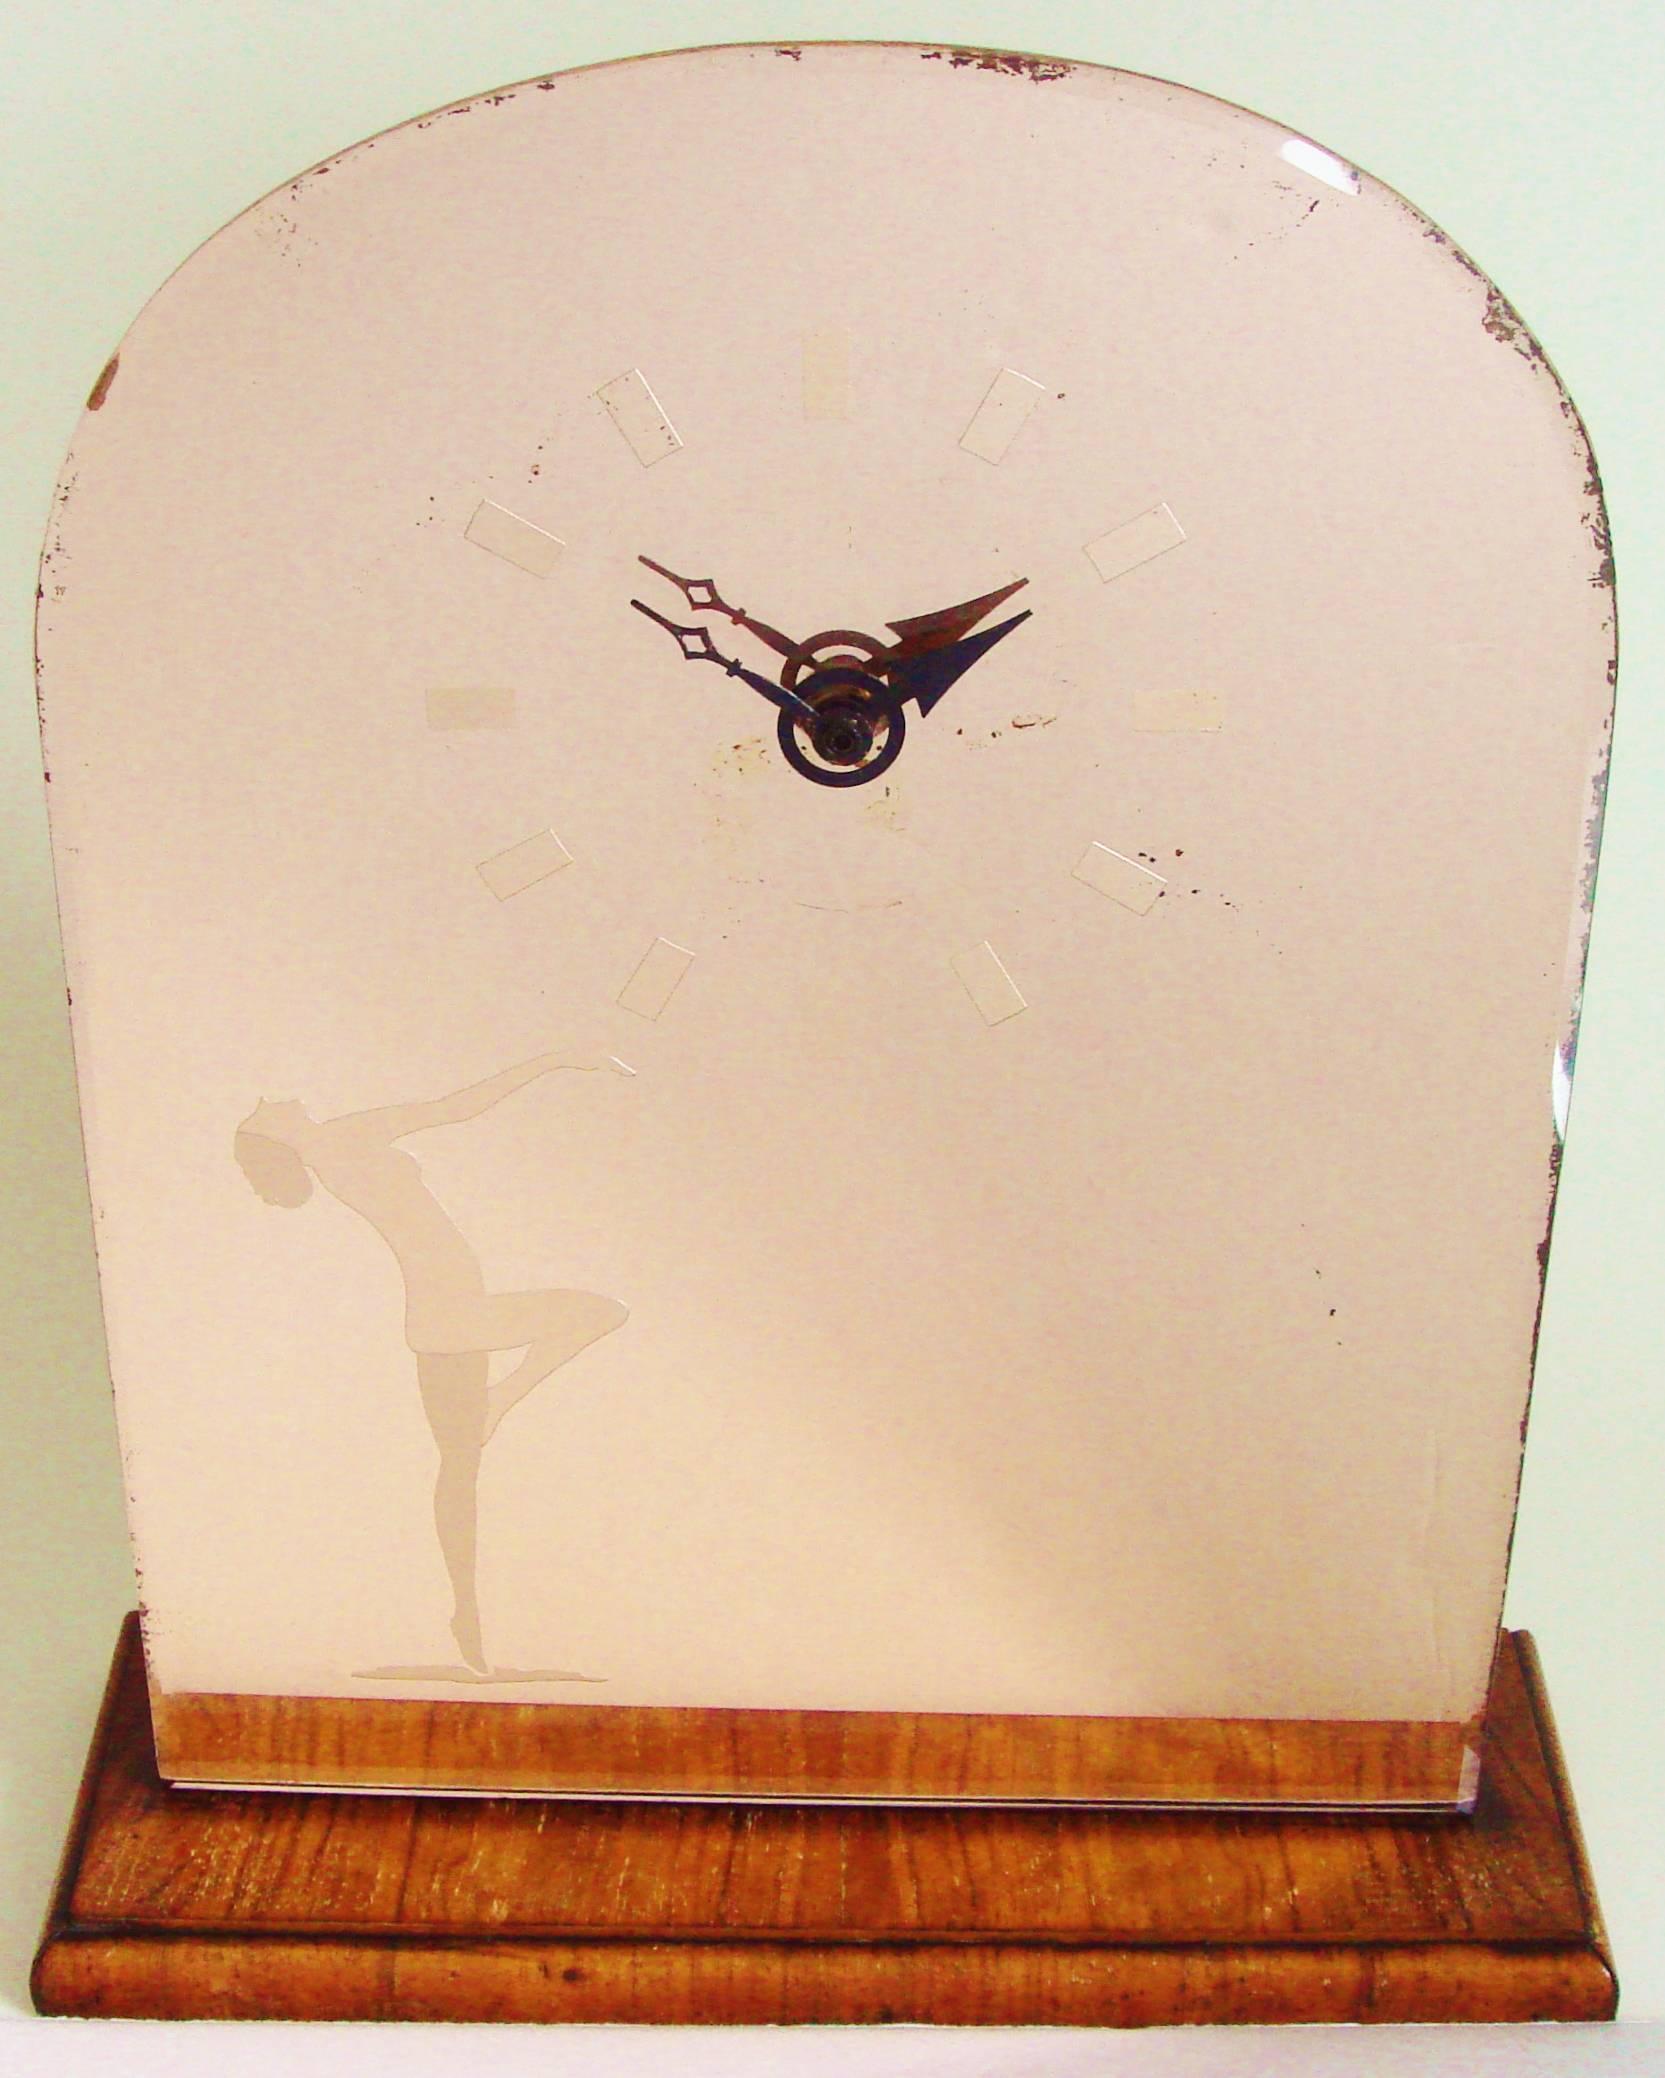 Mid-20th Century English Art Deco Wood & Peach Mirror Mantel Clock with Etched Nude & Numerals For Sale